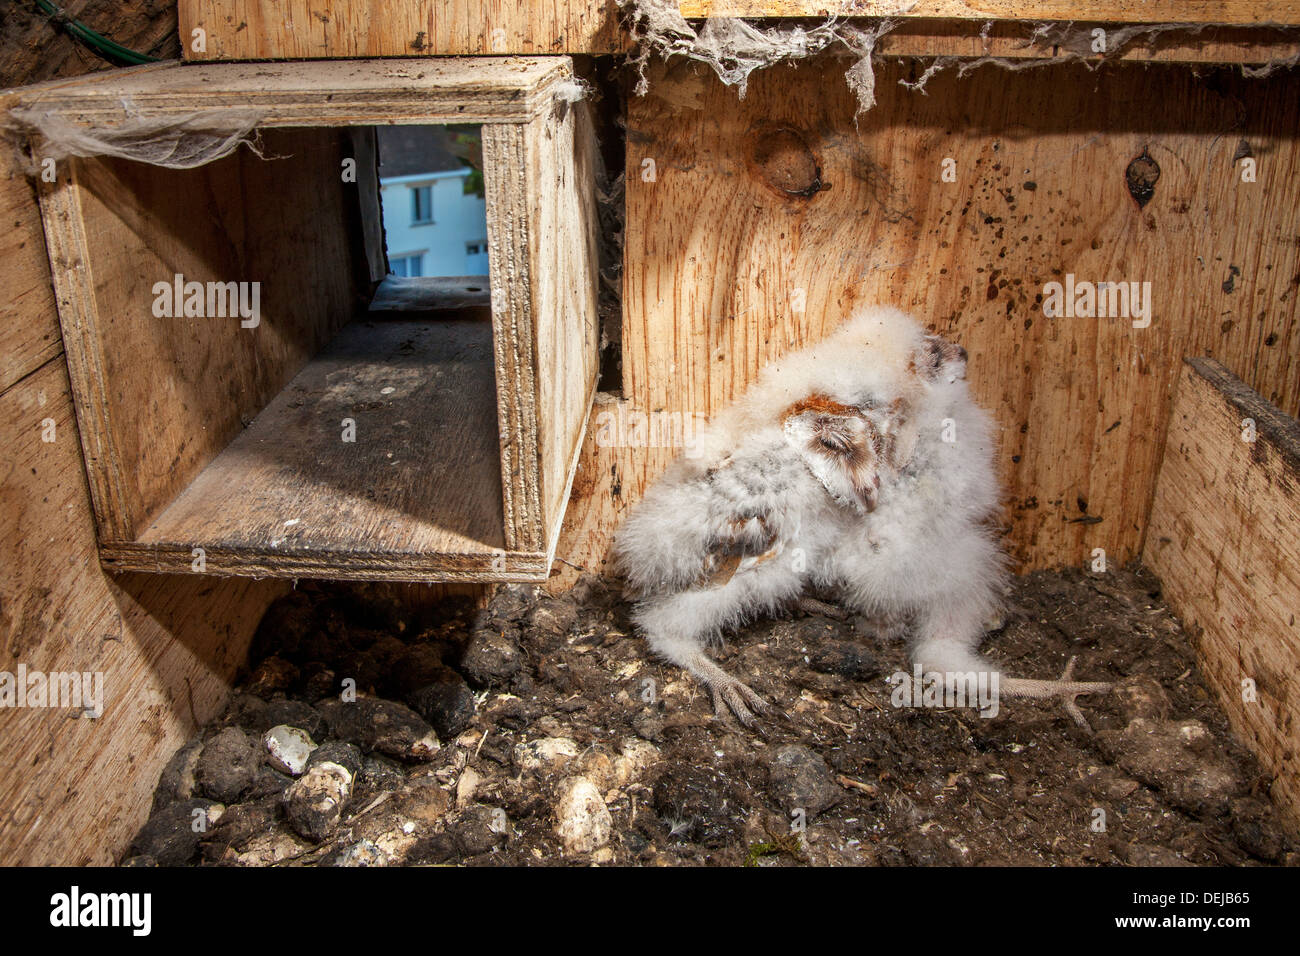 Barn owl (Tyto alba) owlets / chicks in opened wooden nestbox / nest box showing entrance hole Stock Photo